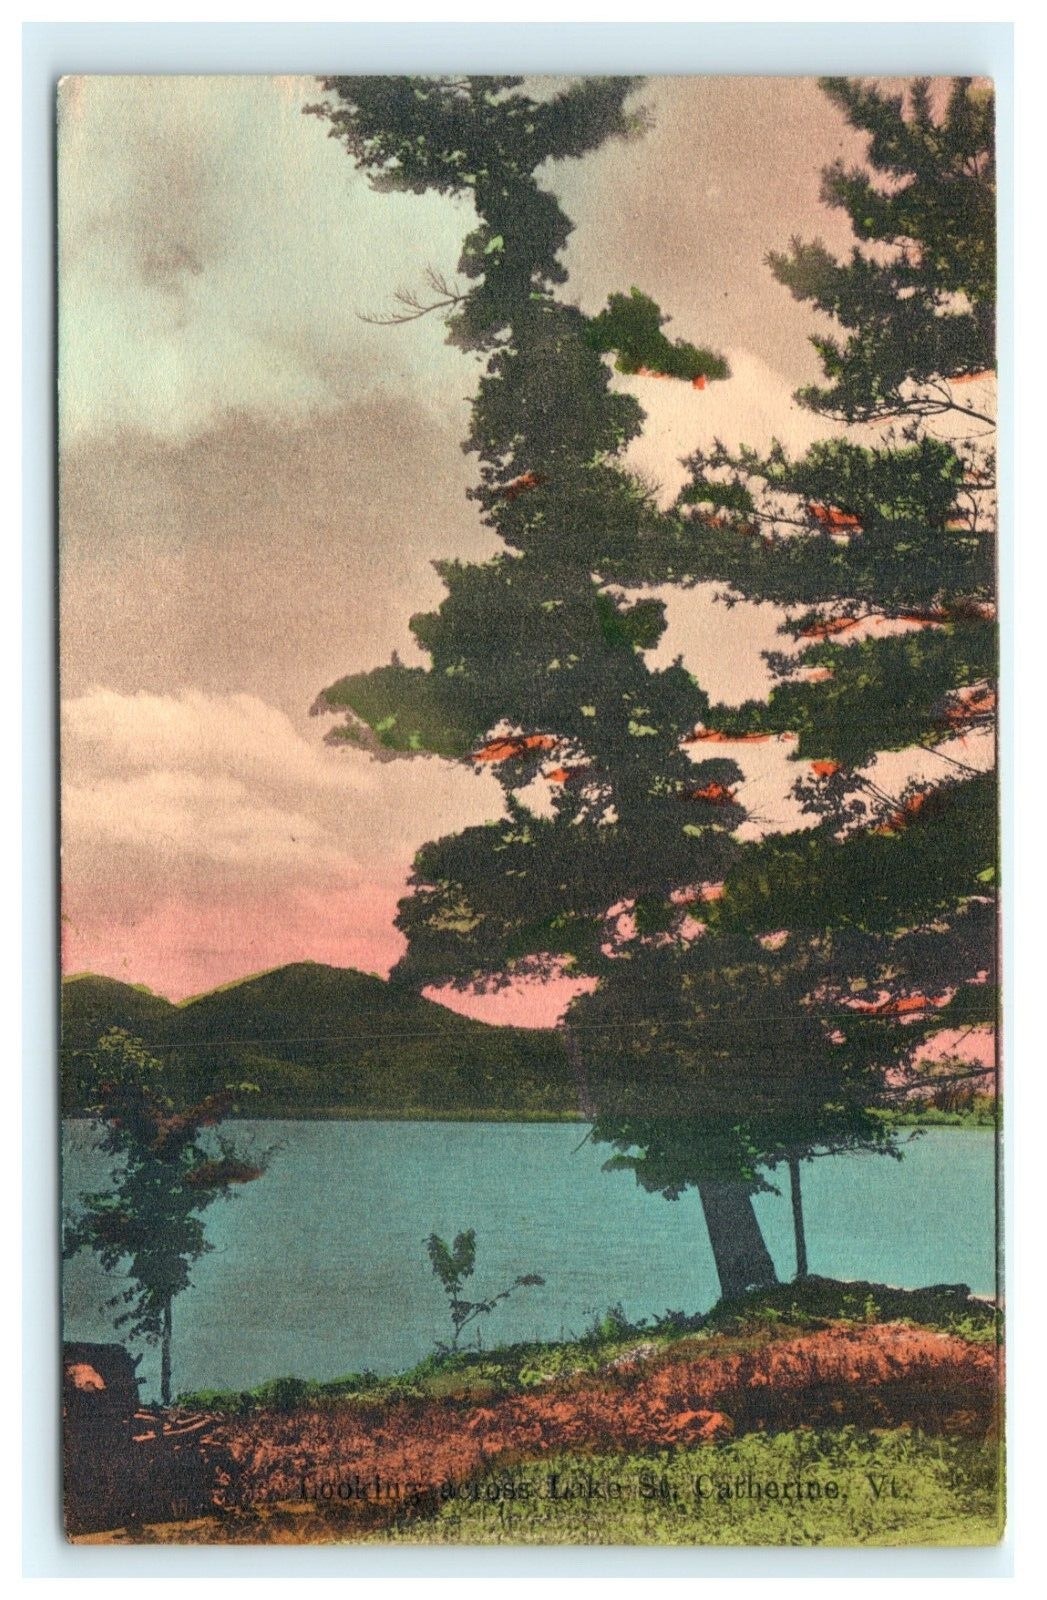 Looking Across Lake St. Catherine VT Vermont Early Postcard Colorful Sunset